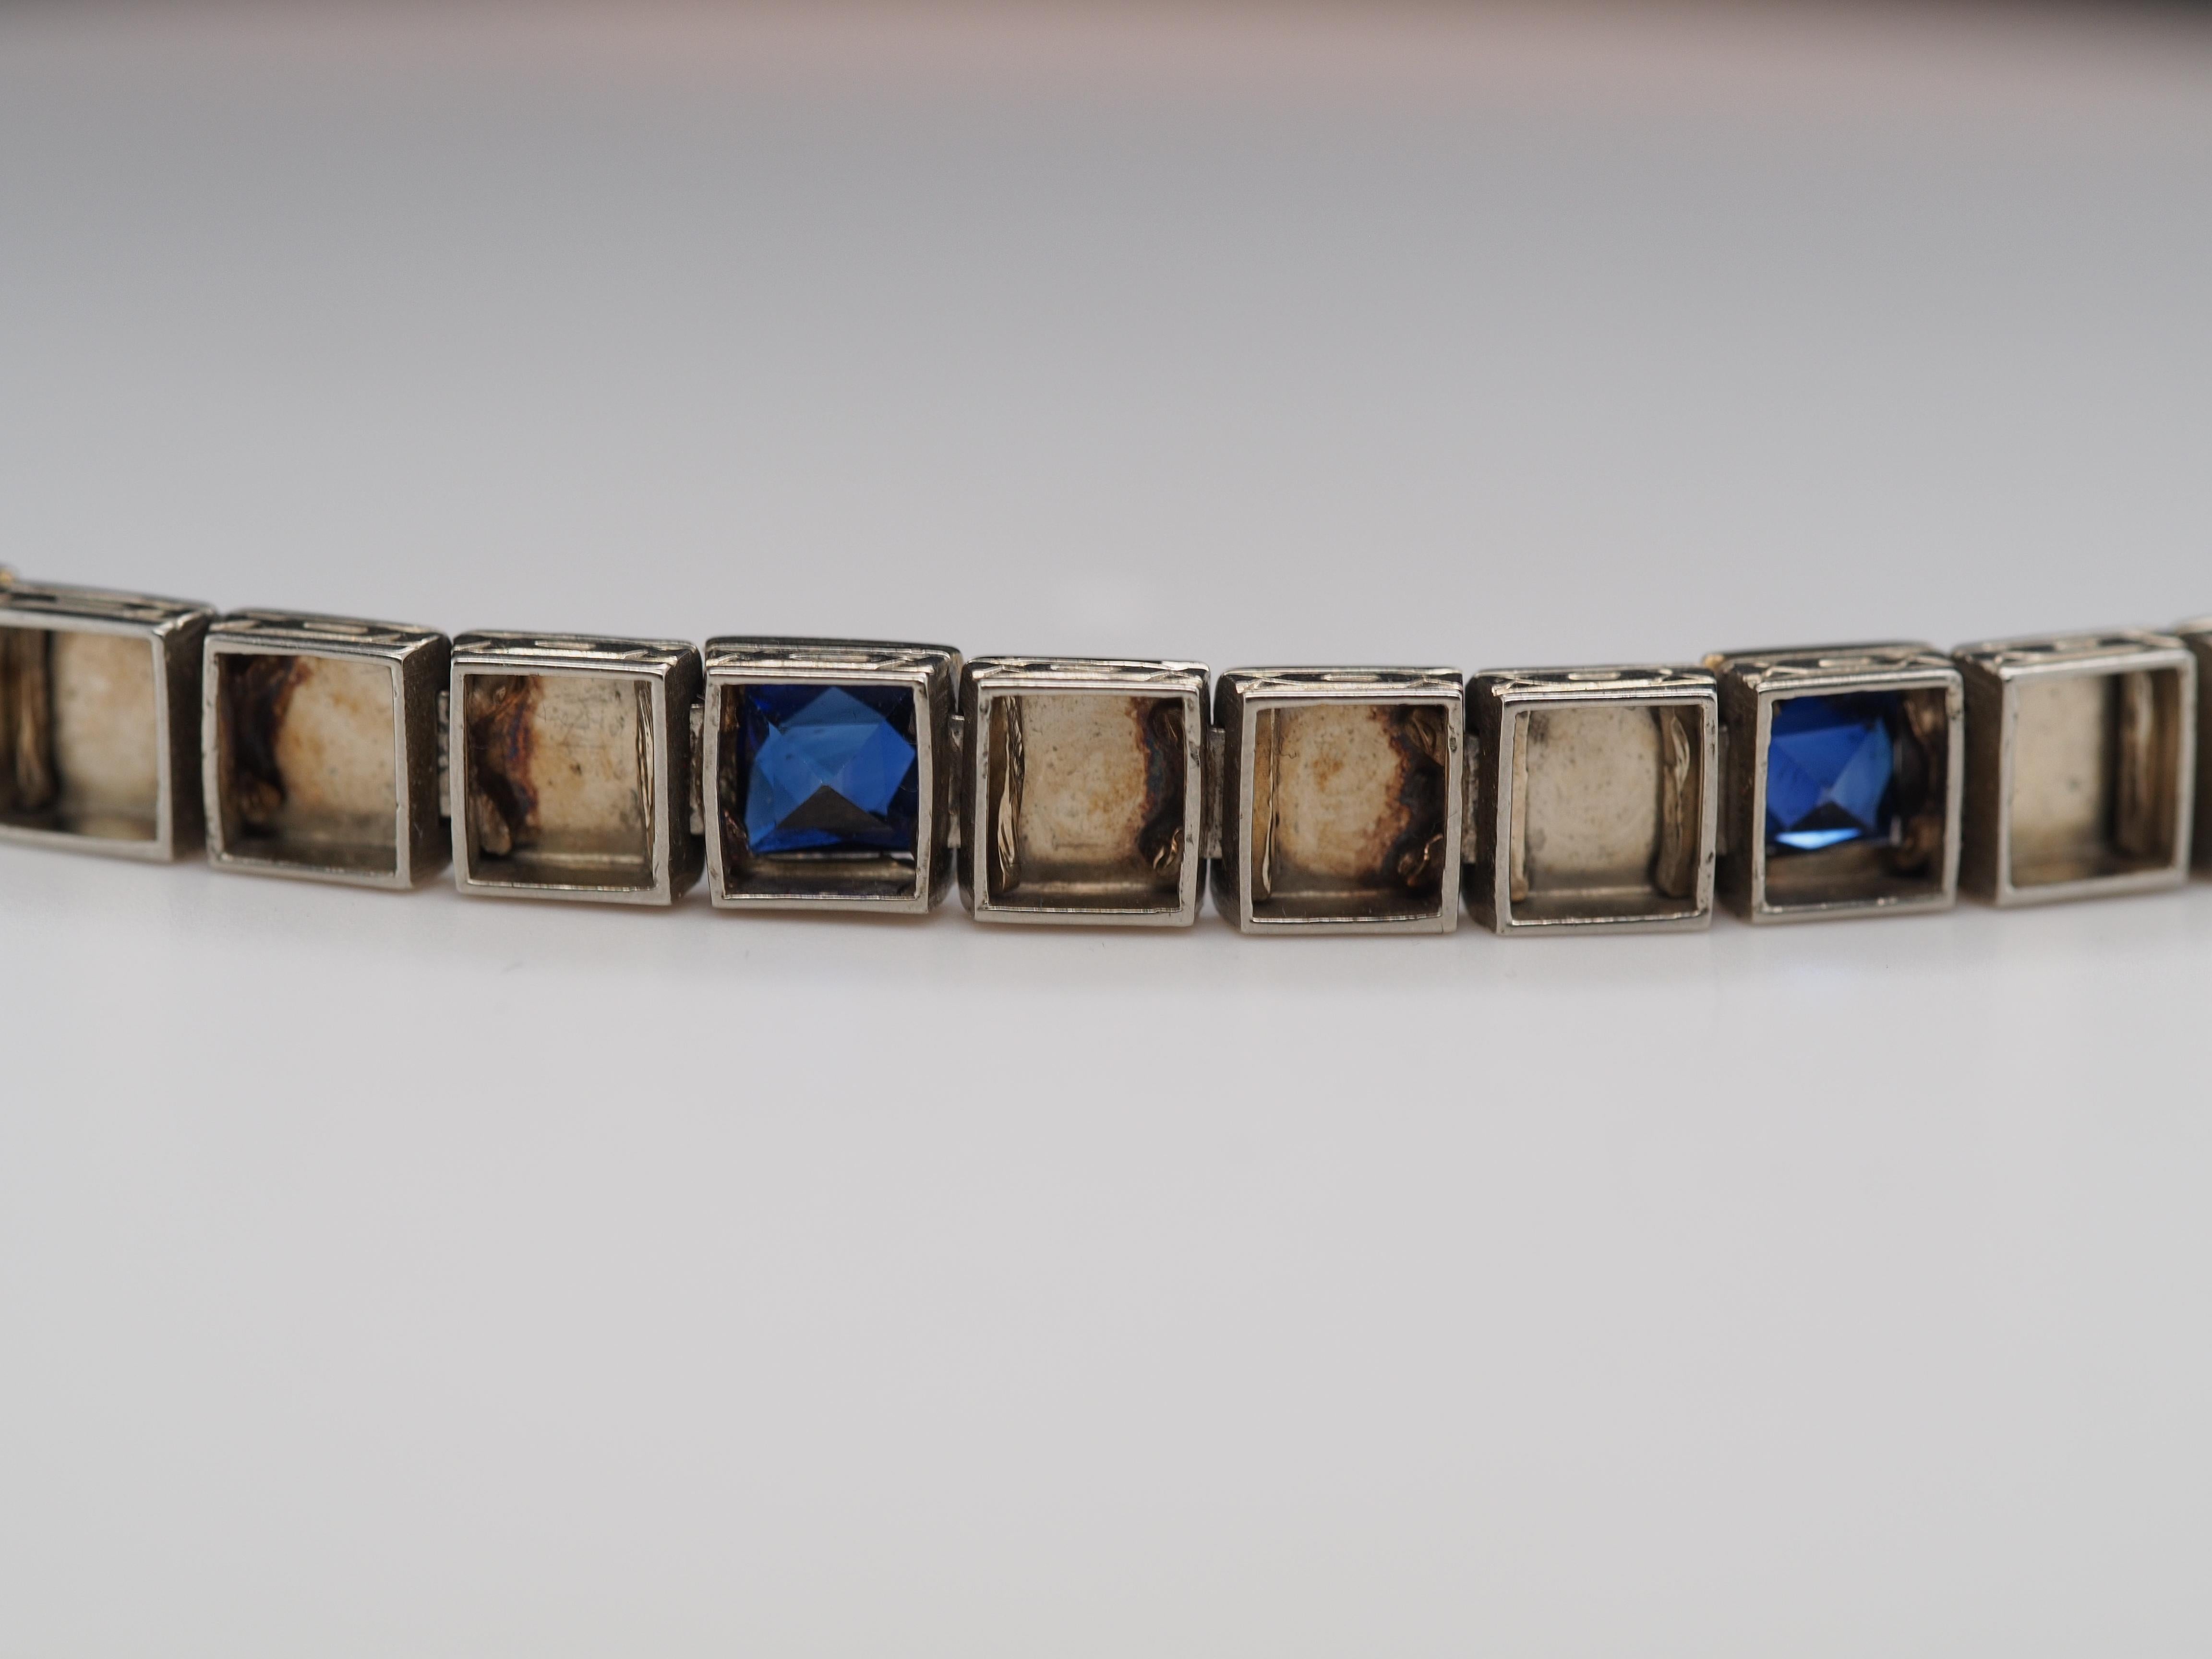 Item Details:
Metal Type: 18K White Gold [Hallmarked, and Tested]
Weight: 11.8 grams (All Items Total)
Stone Details:
Type: Sapphire
Weight: 2.00ct, total weight
Cut: French Cut
Bracelet Length in Inches: 7 inch
Condition: Excellent